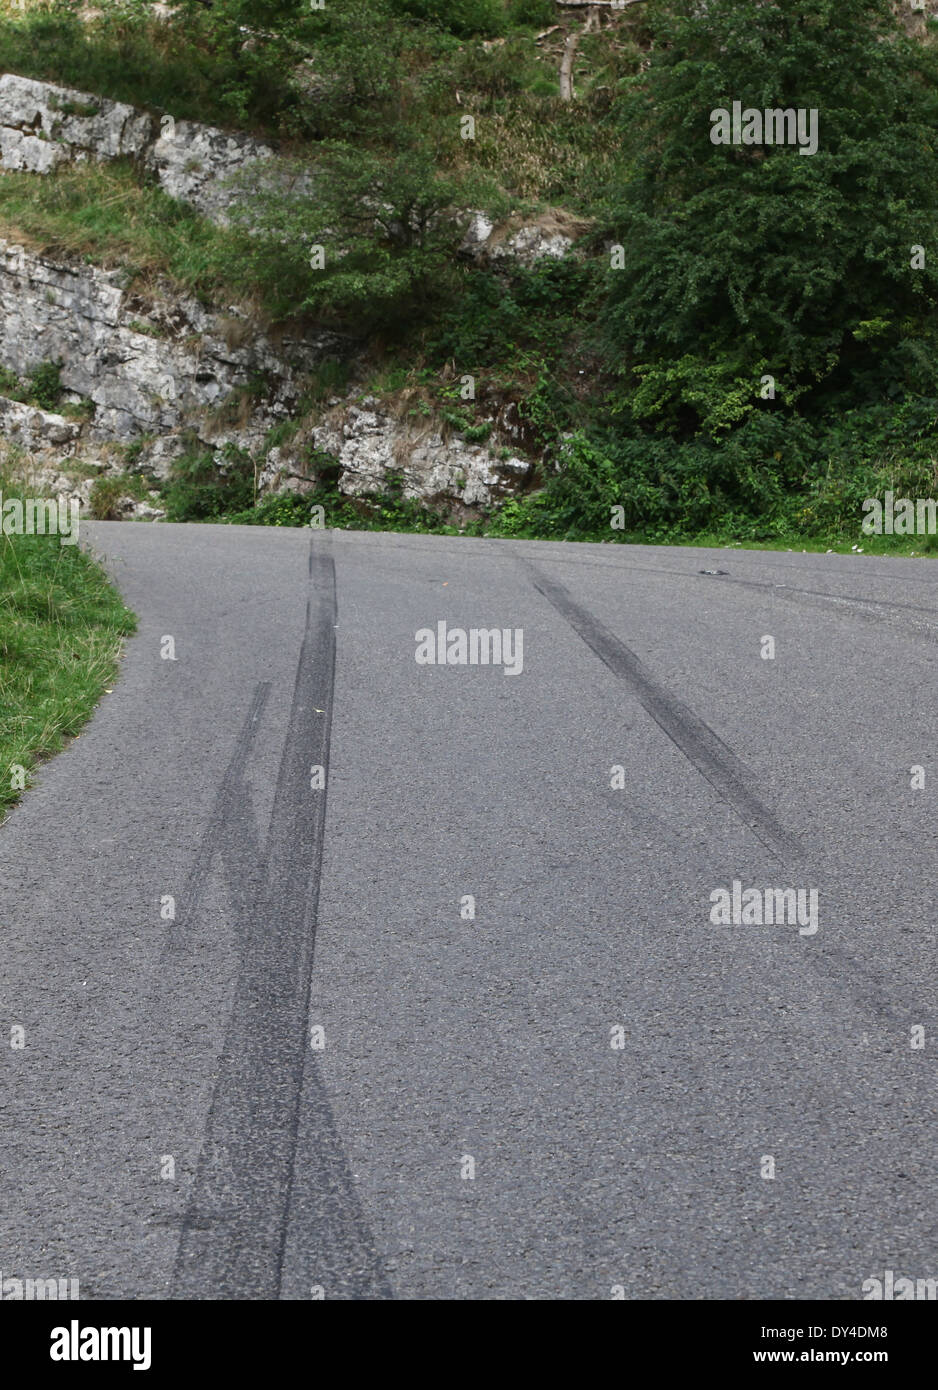 September 2013 - Tyre marks left on the road following a car accident in Cheddar gorge, Somerset. Stock Photo